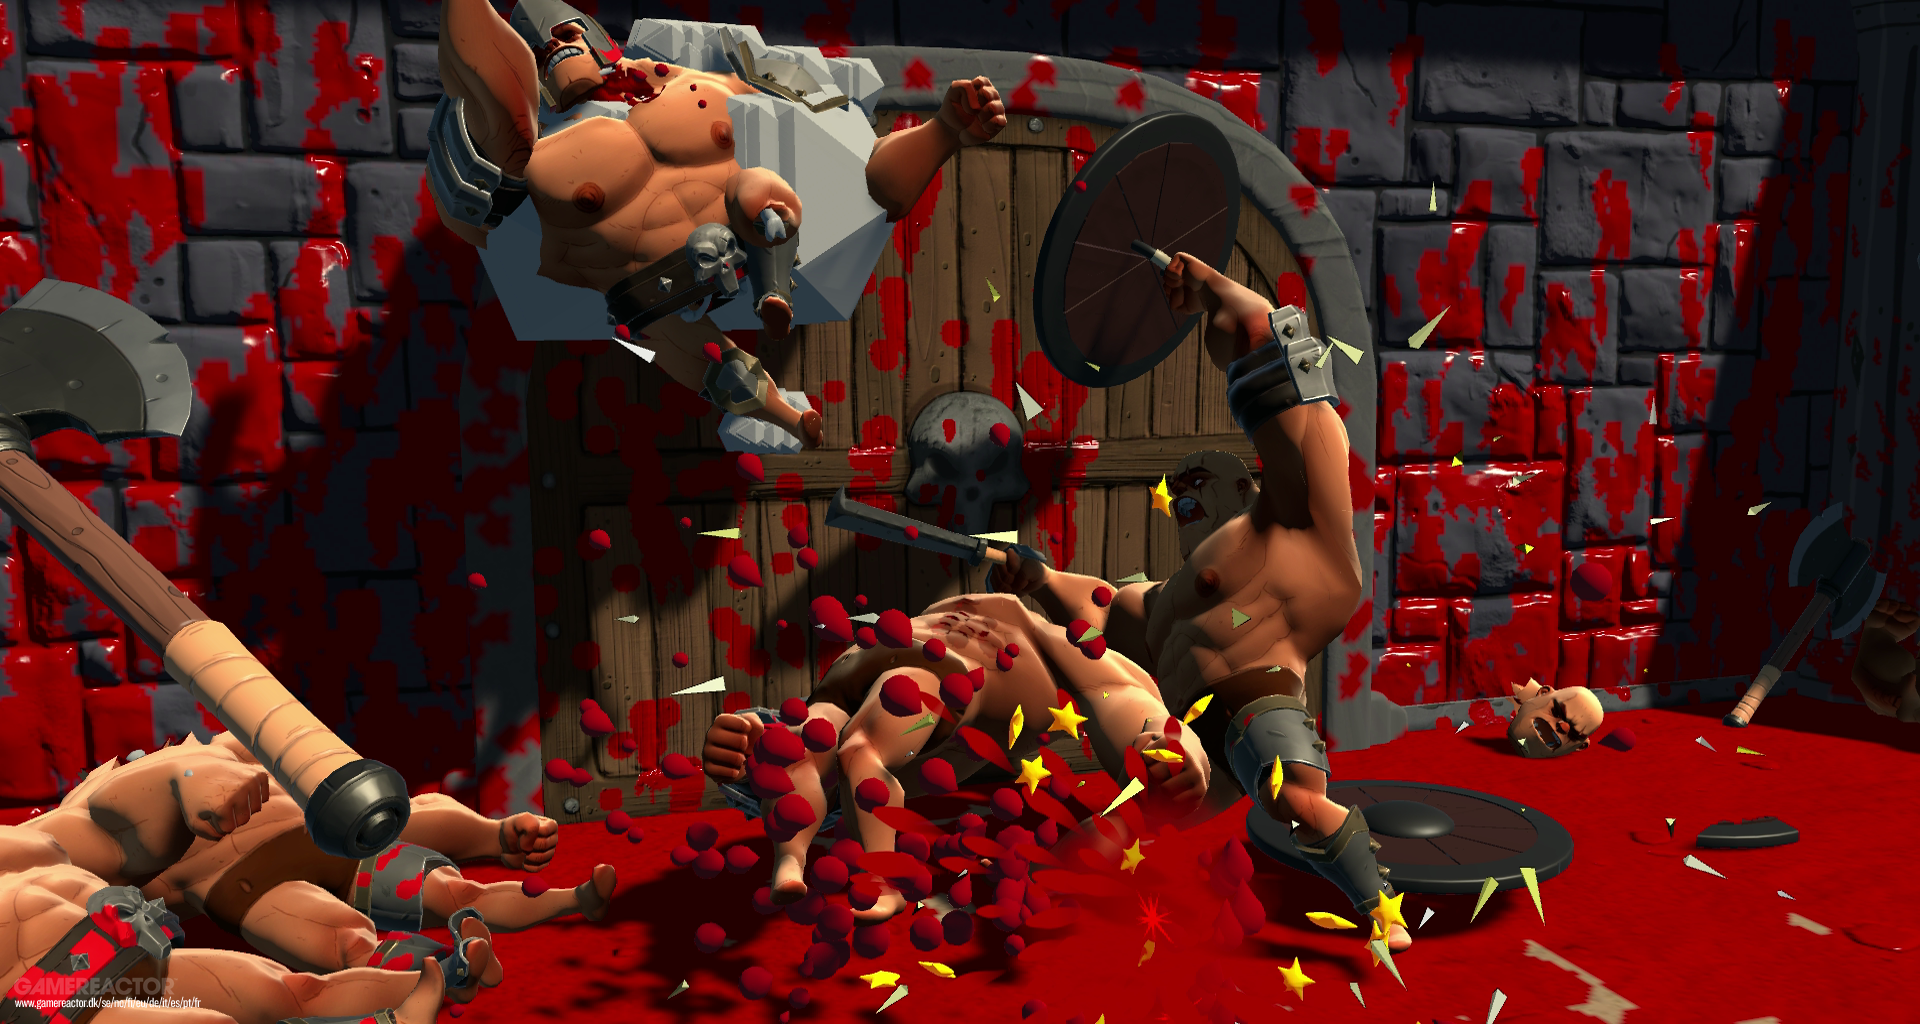 Brutal gladiator combat simulator Gorn is now available for PS VR2